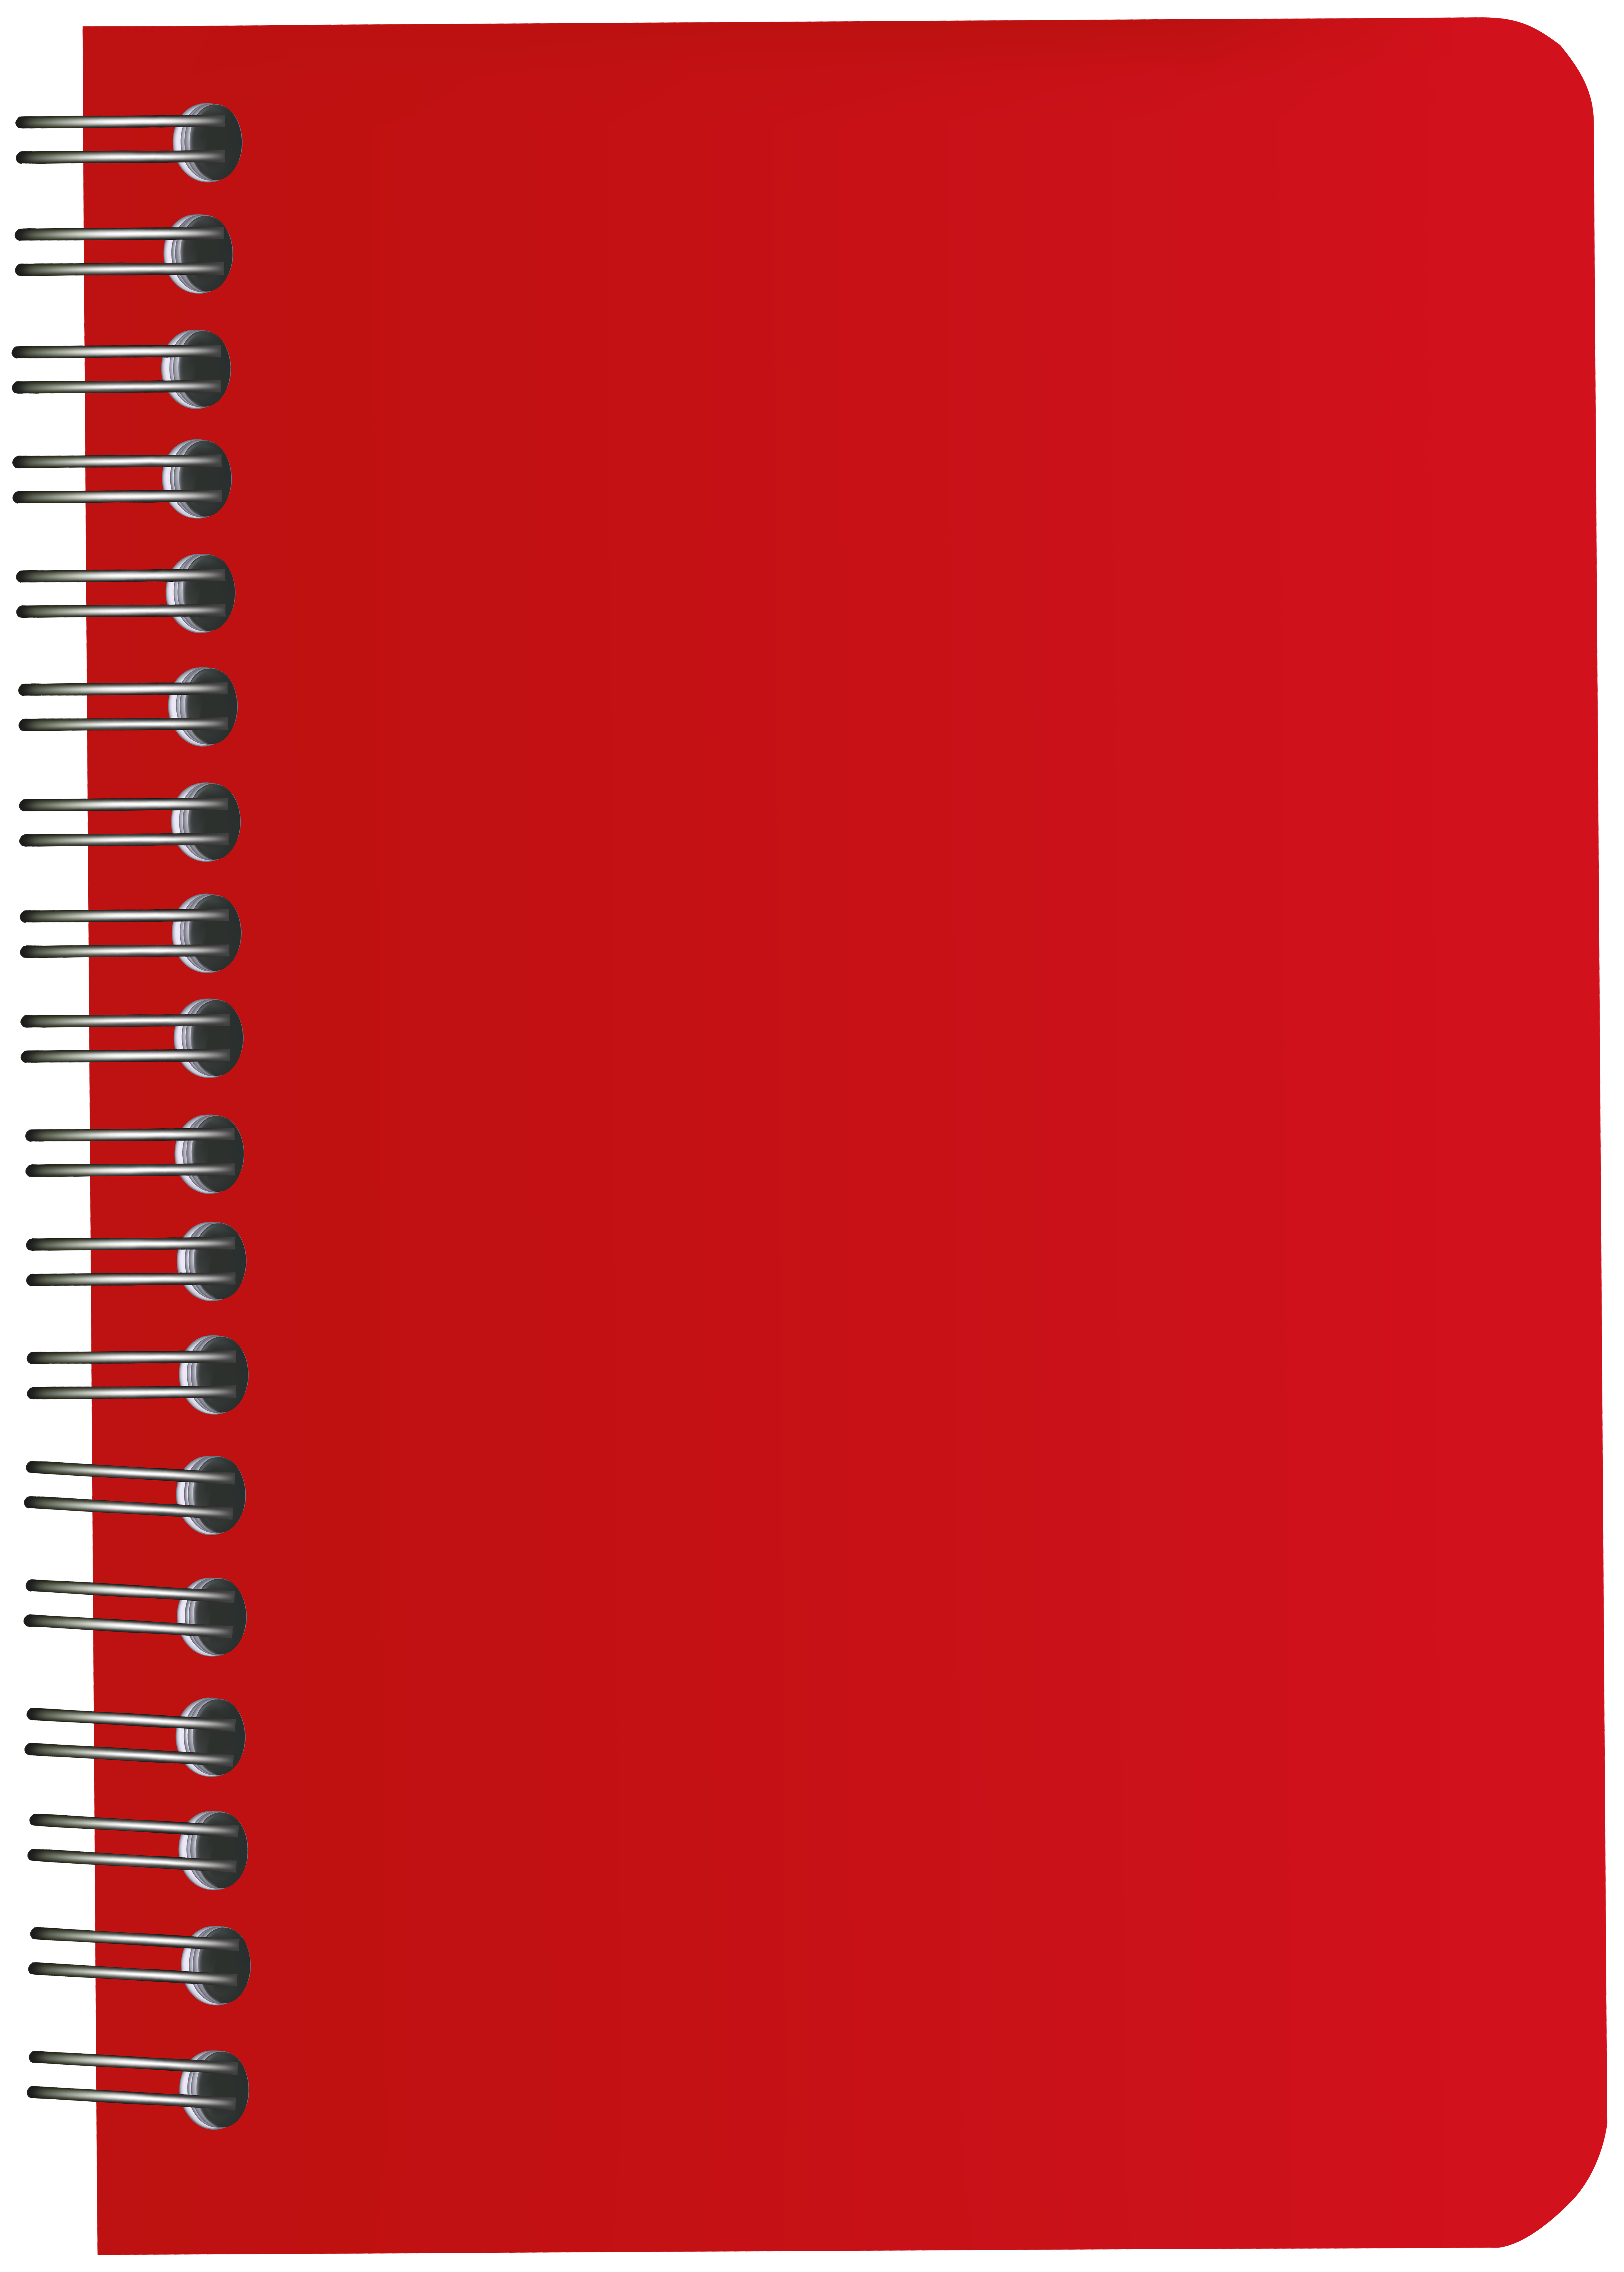 Download PNG image - Notebook PNG Clipart Background 